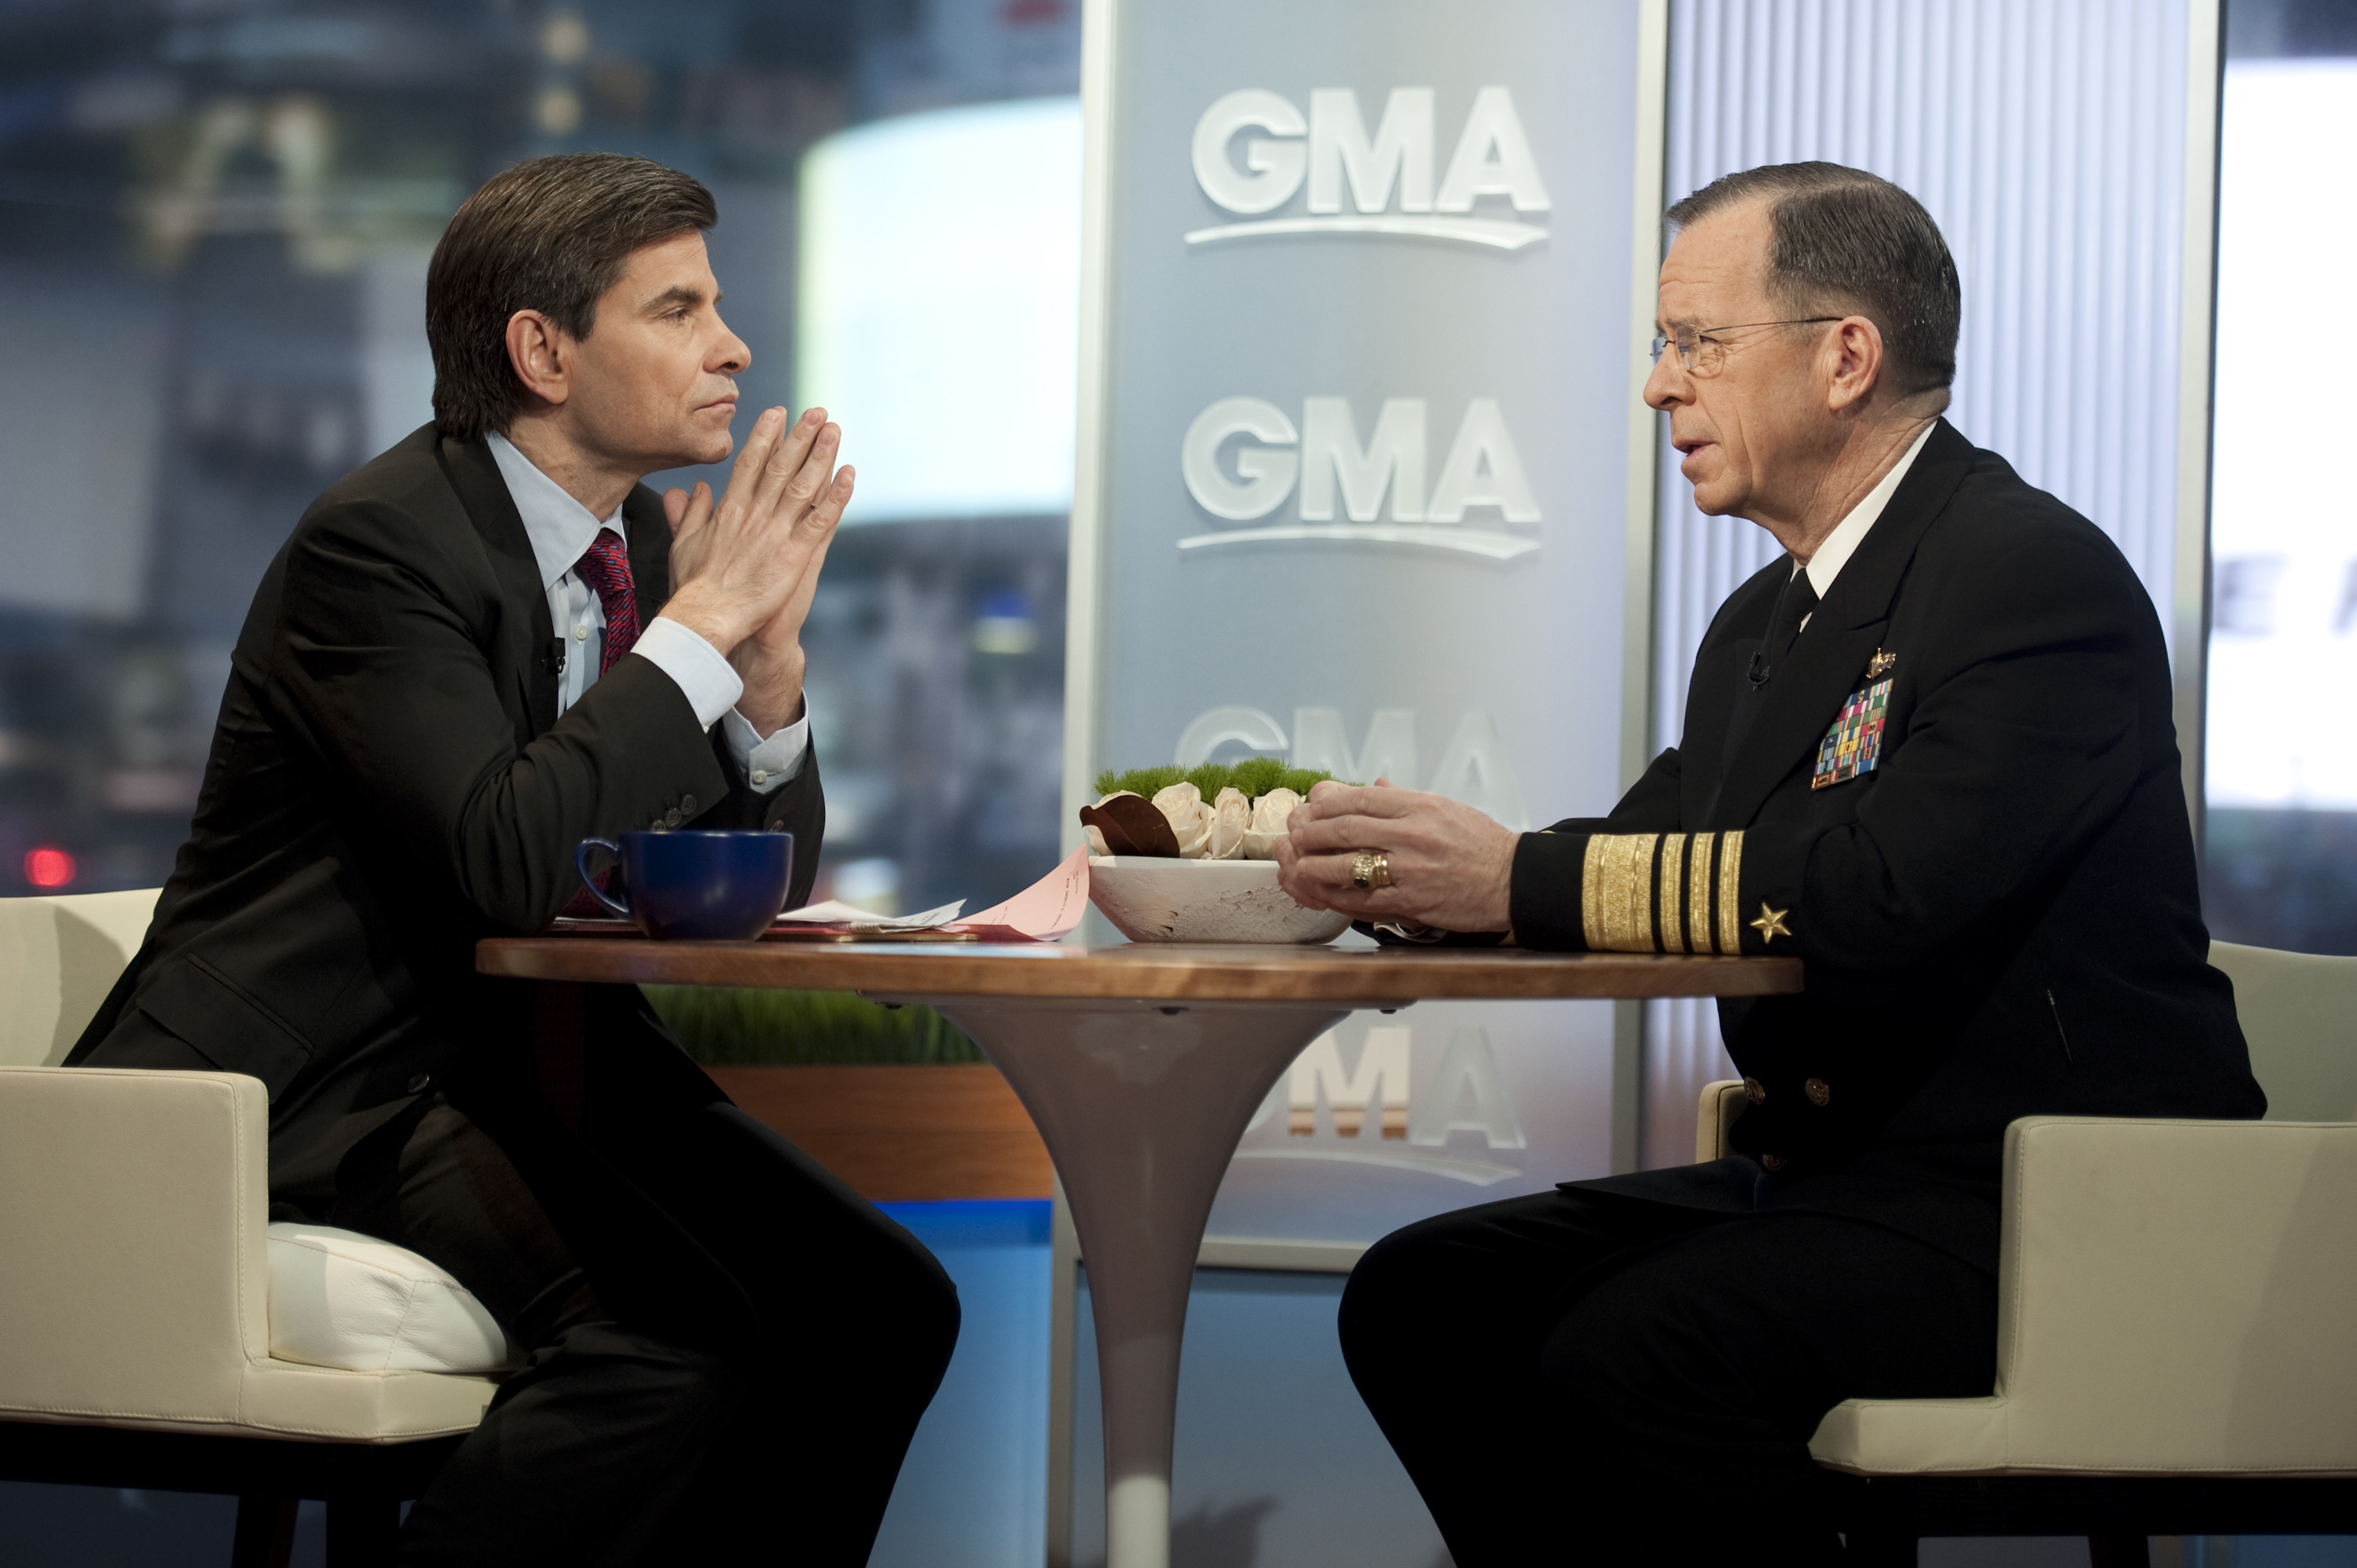 George Stephanopoulos, host of ABC's "Good Morning America," will deliver F&M's 2014 Commencement address and receive an honorary degree.